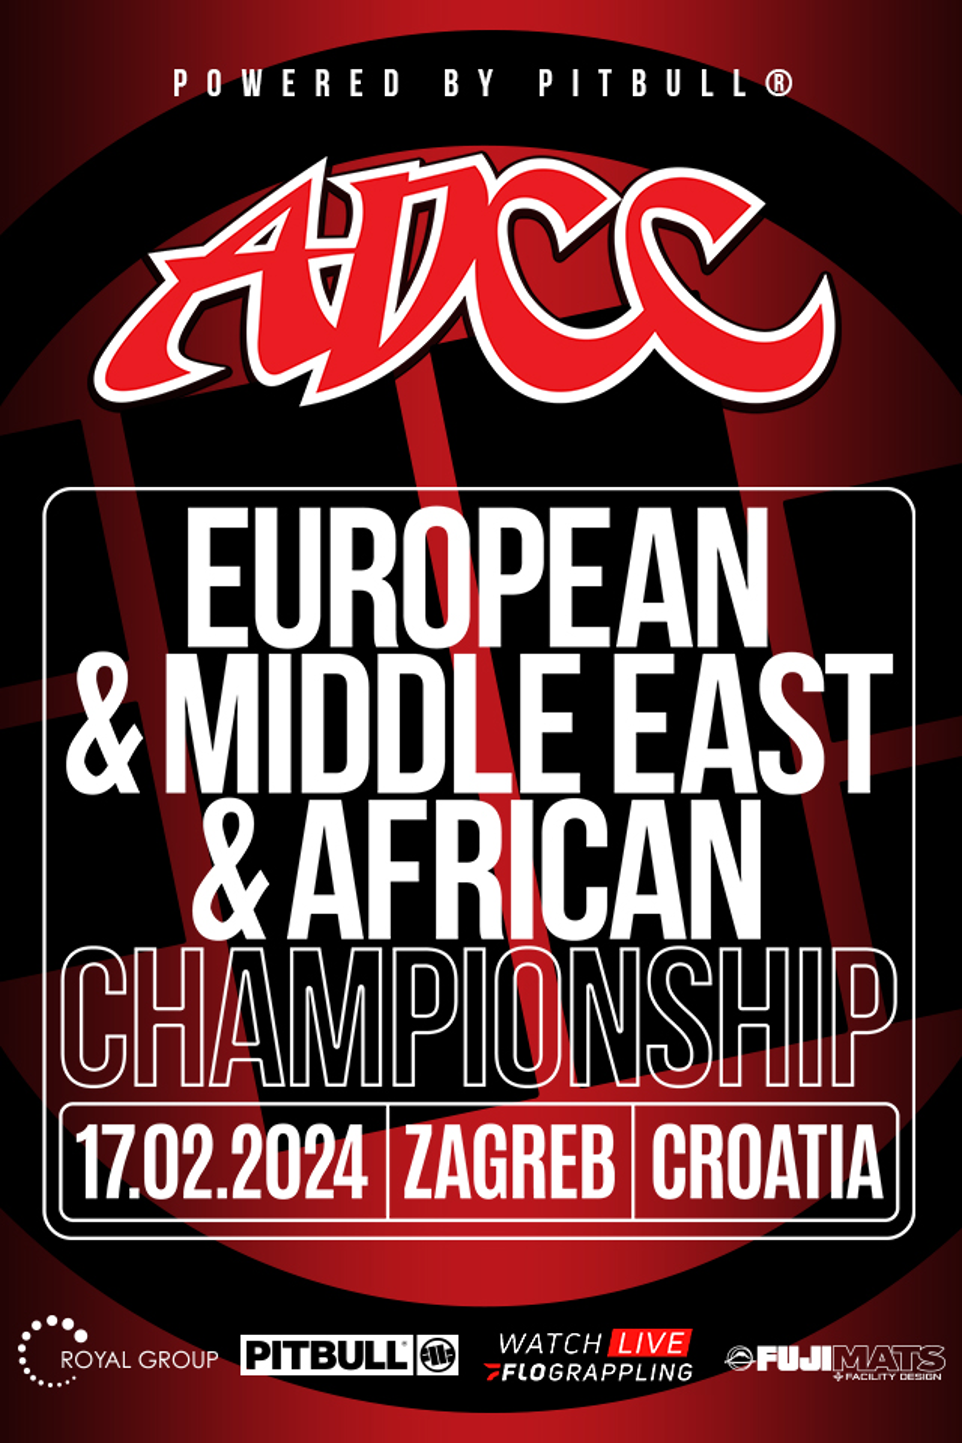 ADCC EUROPEAN, MIDDLE EAST & AFRICAN CHAMPIONSHIP 2024